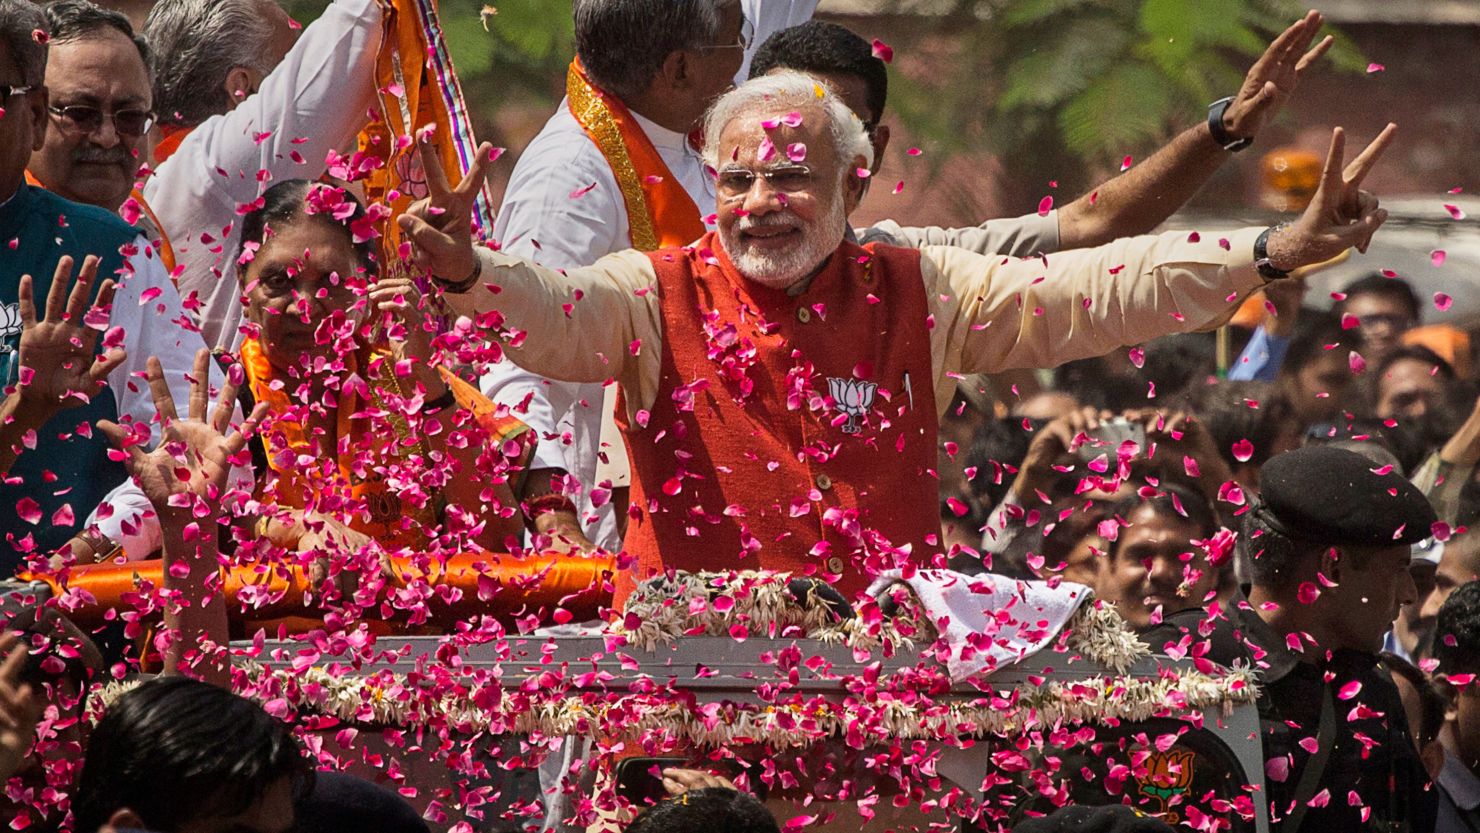 Prime Minister Narendra Modi, leader of India's ruling Bharatiya Janata Party (BJP), is seeking a second term in office. 